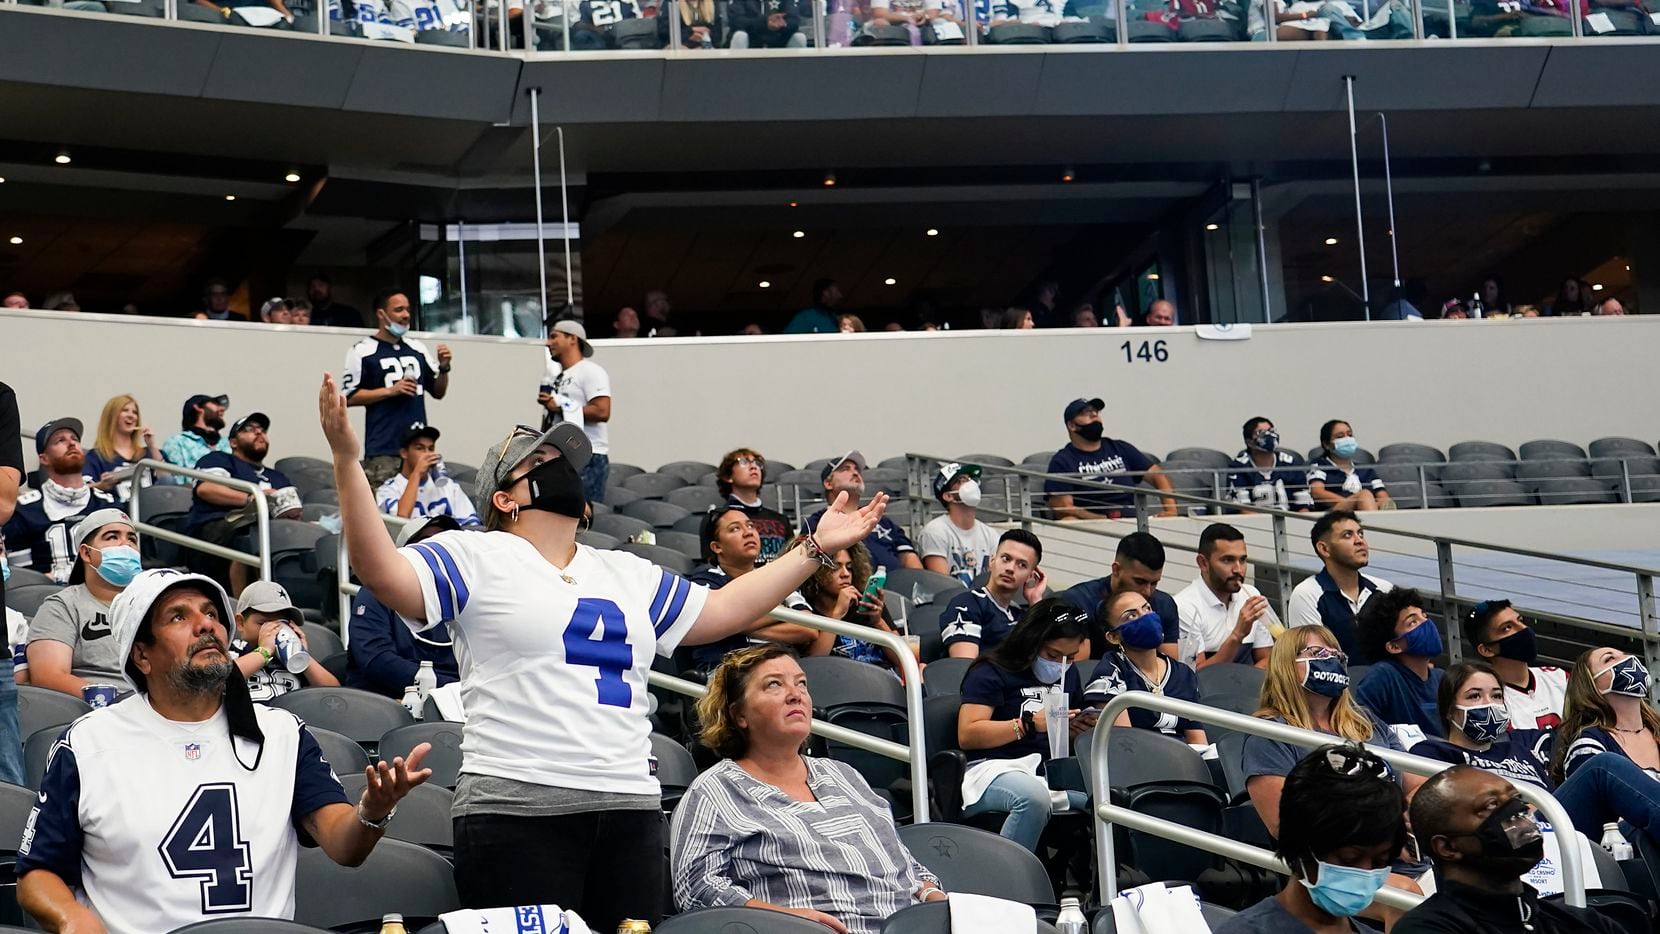 Dallas Cowboys fan reacts after a call went against their team during the second quarter of an NFL football game Atlanta Falcons at AT&T Stadium on Sunday, Sept. 20, 2020, in Arlington.